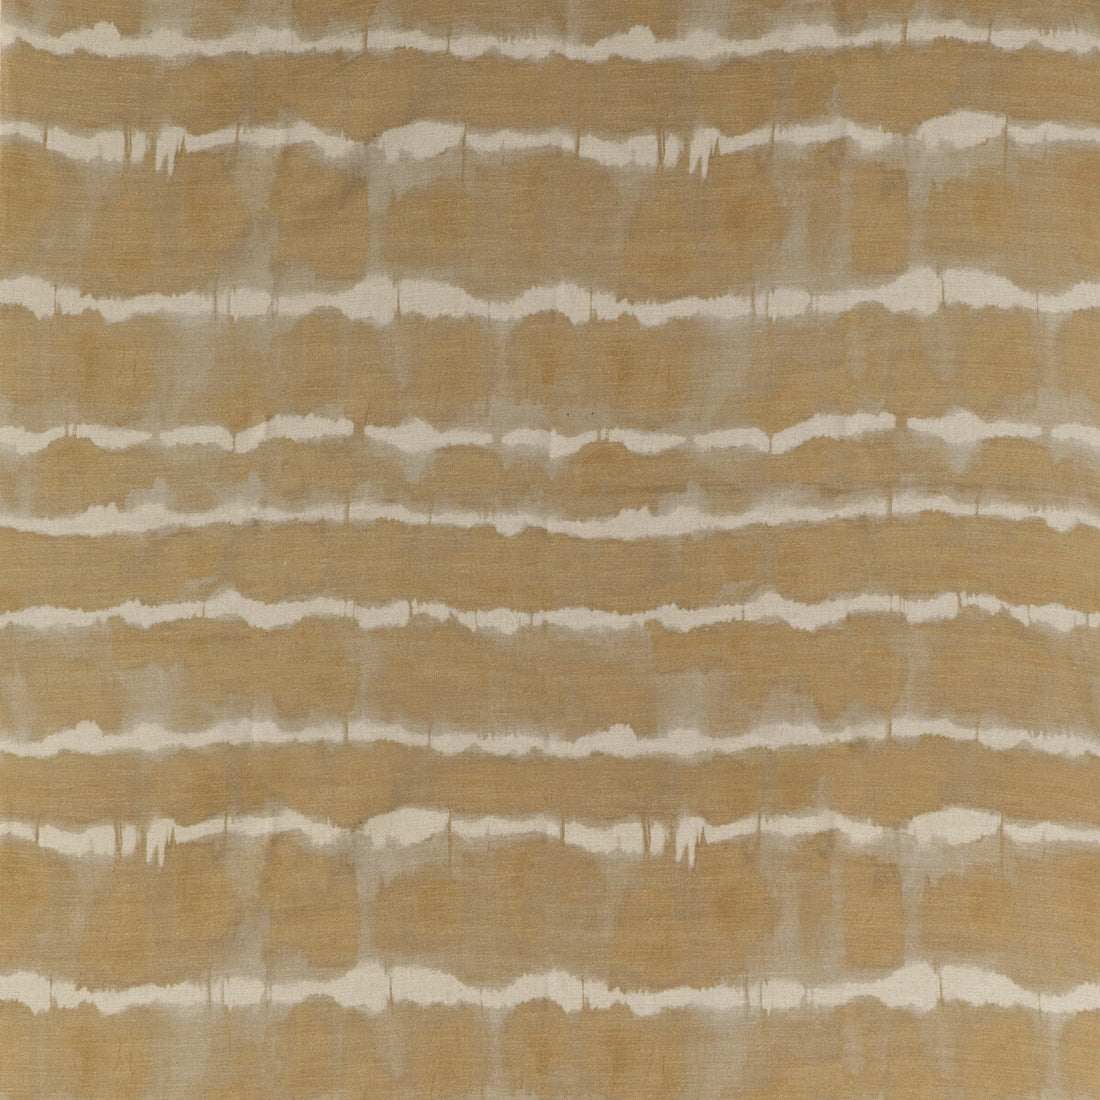 Baturi fabric in gold color - pattern BATURI.4.0 - by Kravet Couture in the Linherr Hollingsworth Boheme II collection